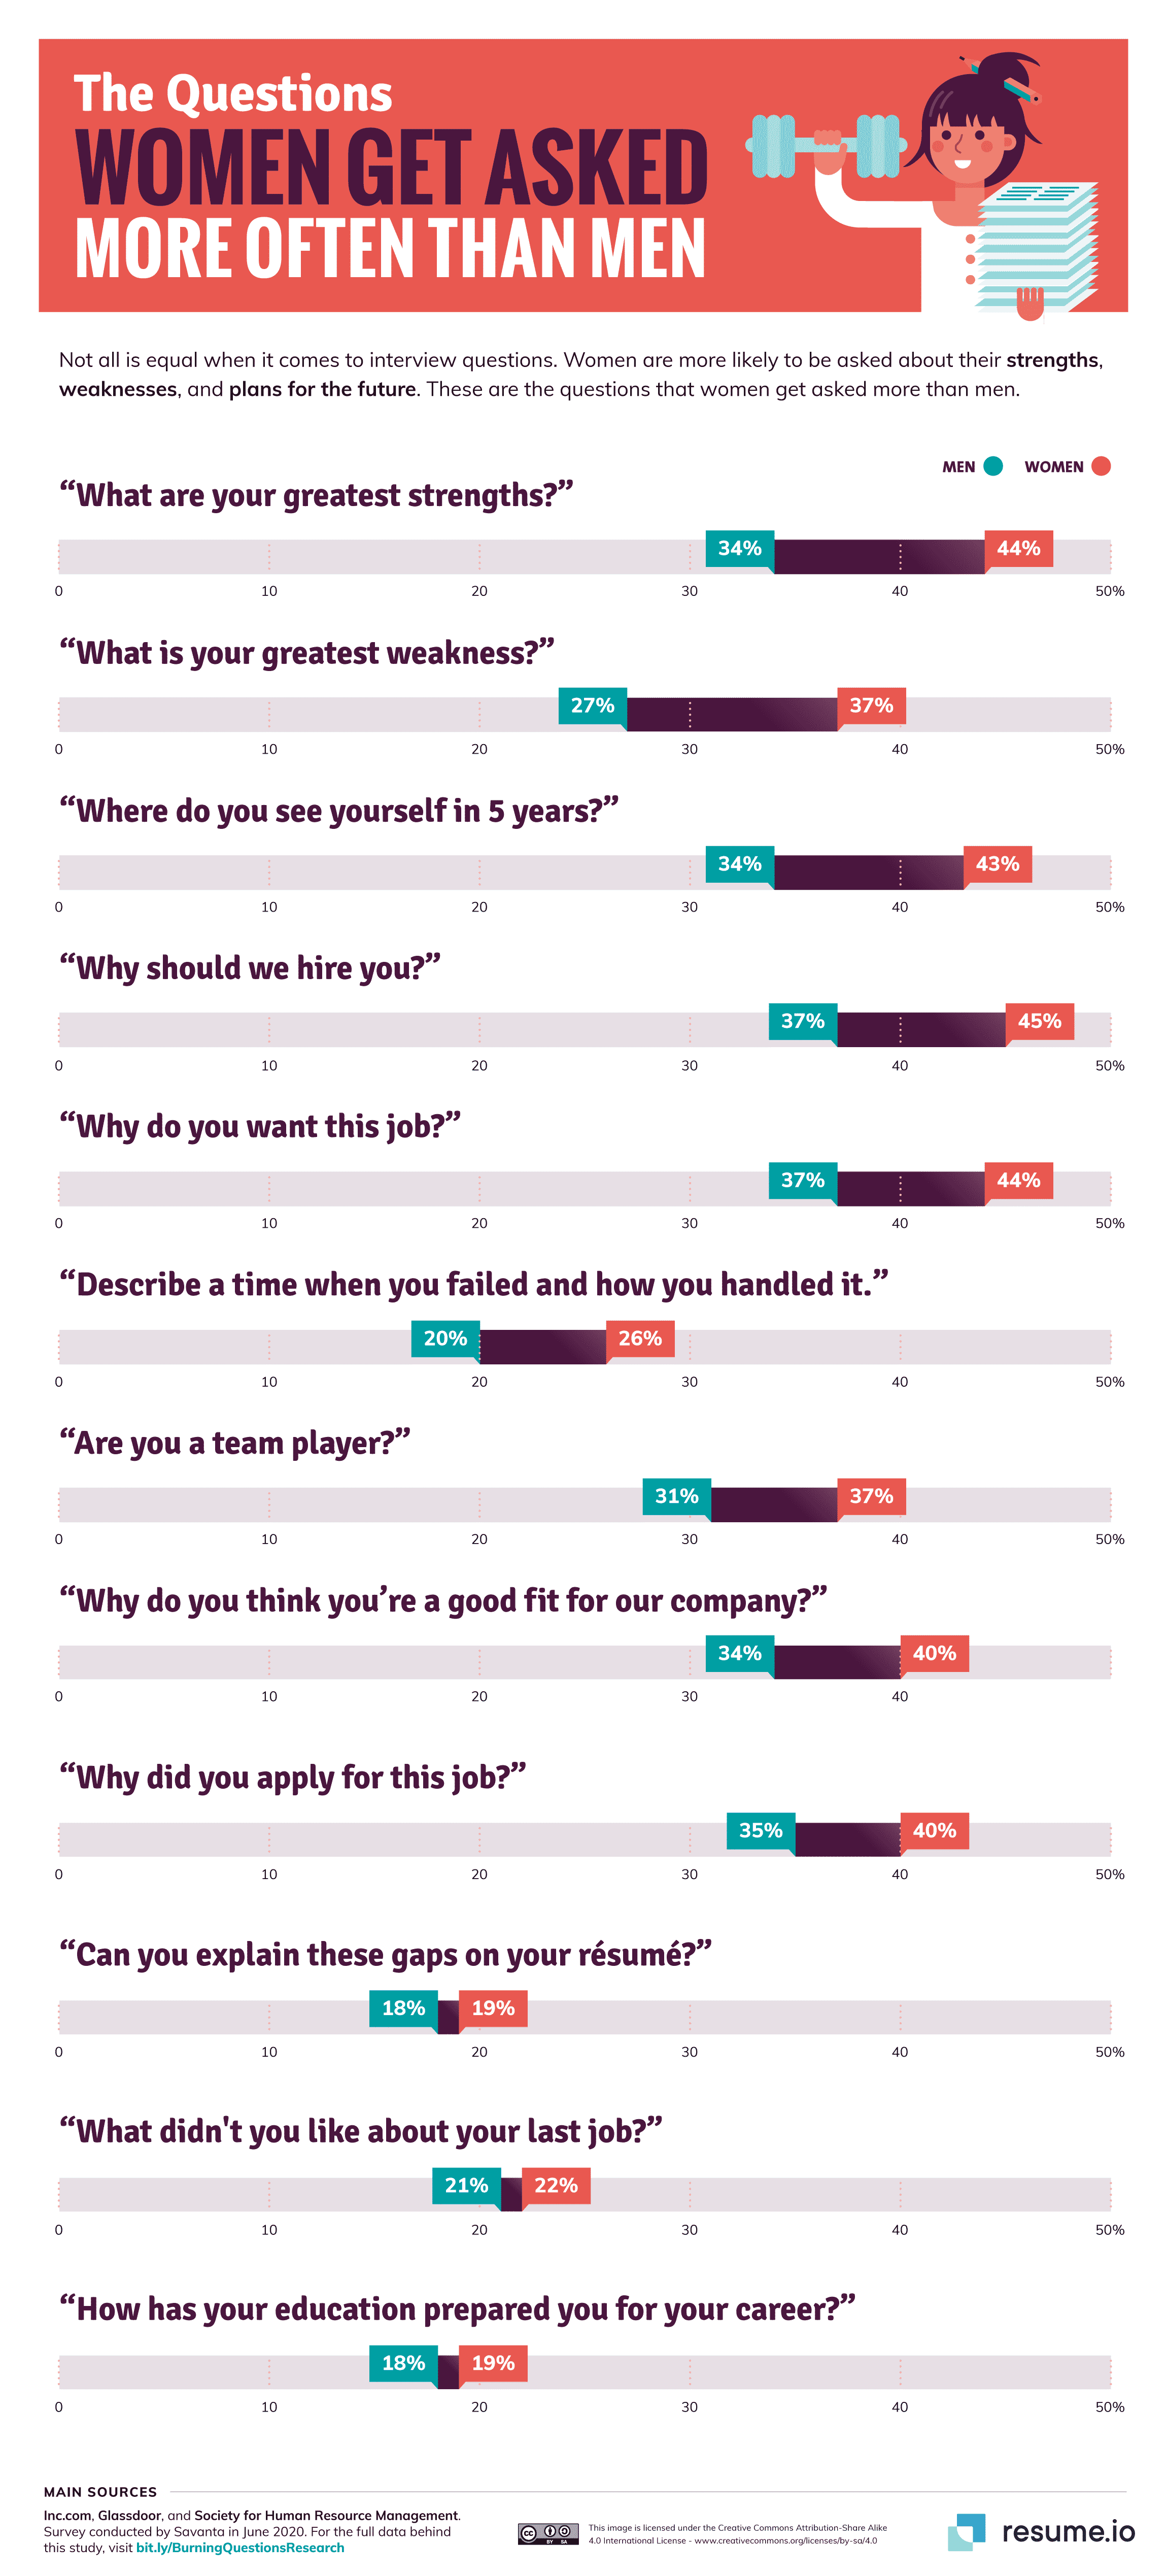 A list of interview questions that women are asked more often than men